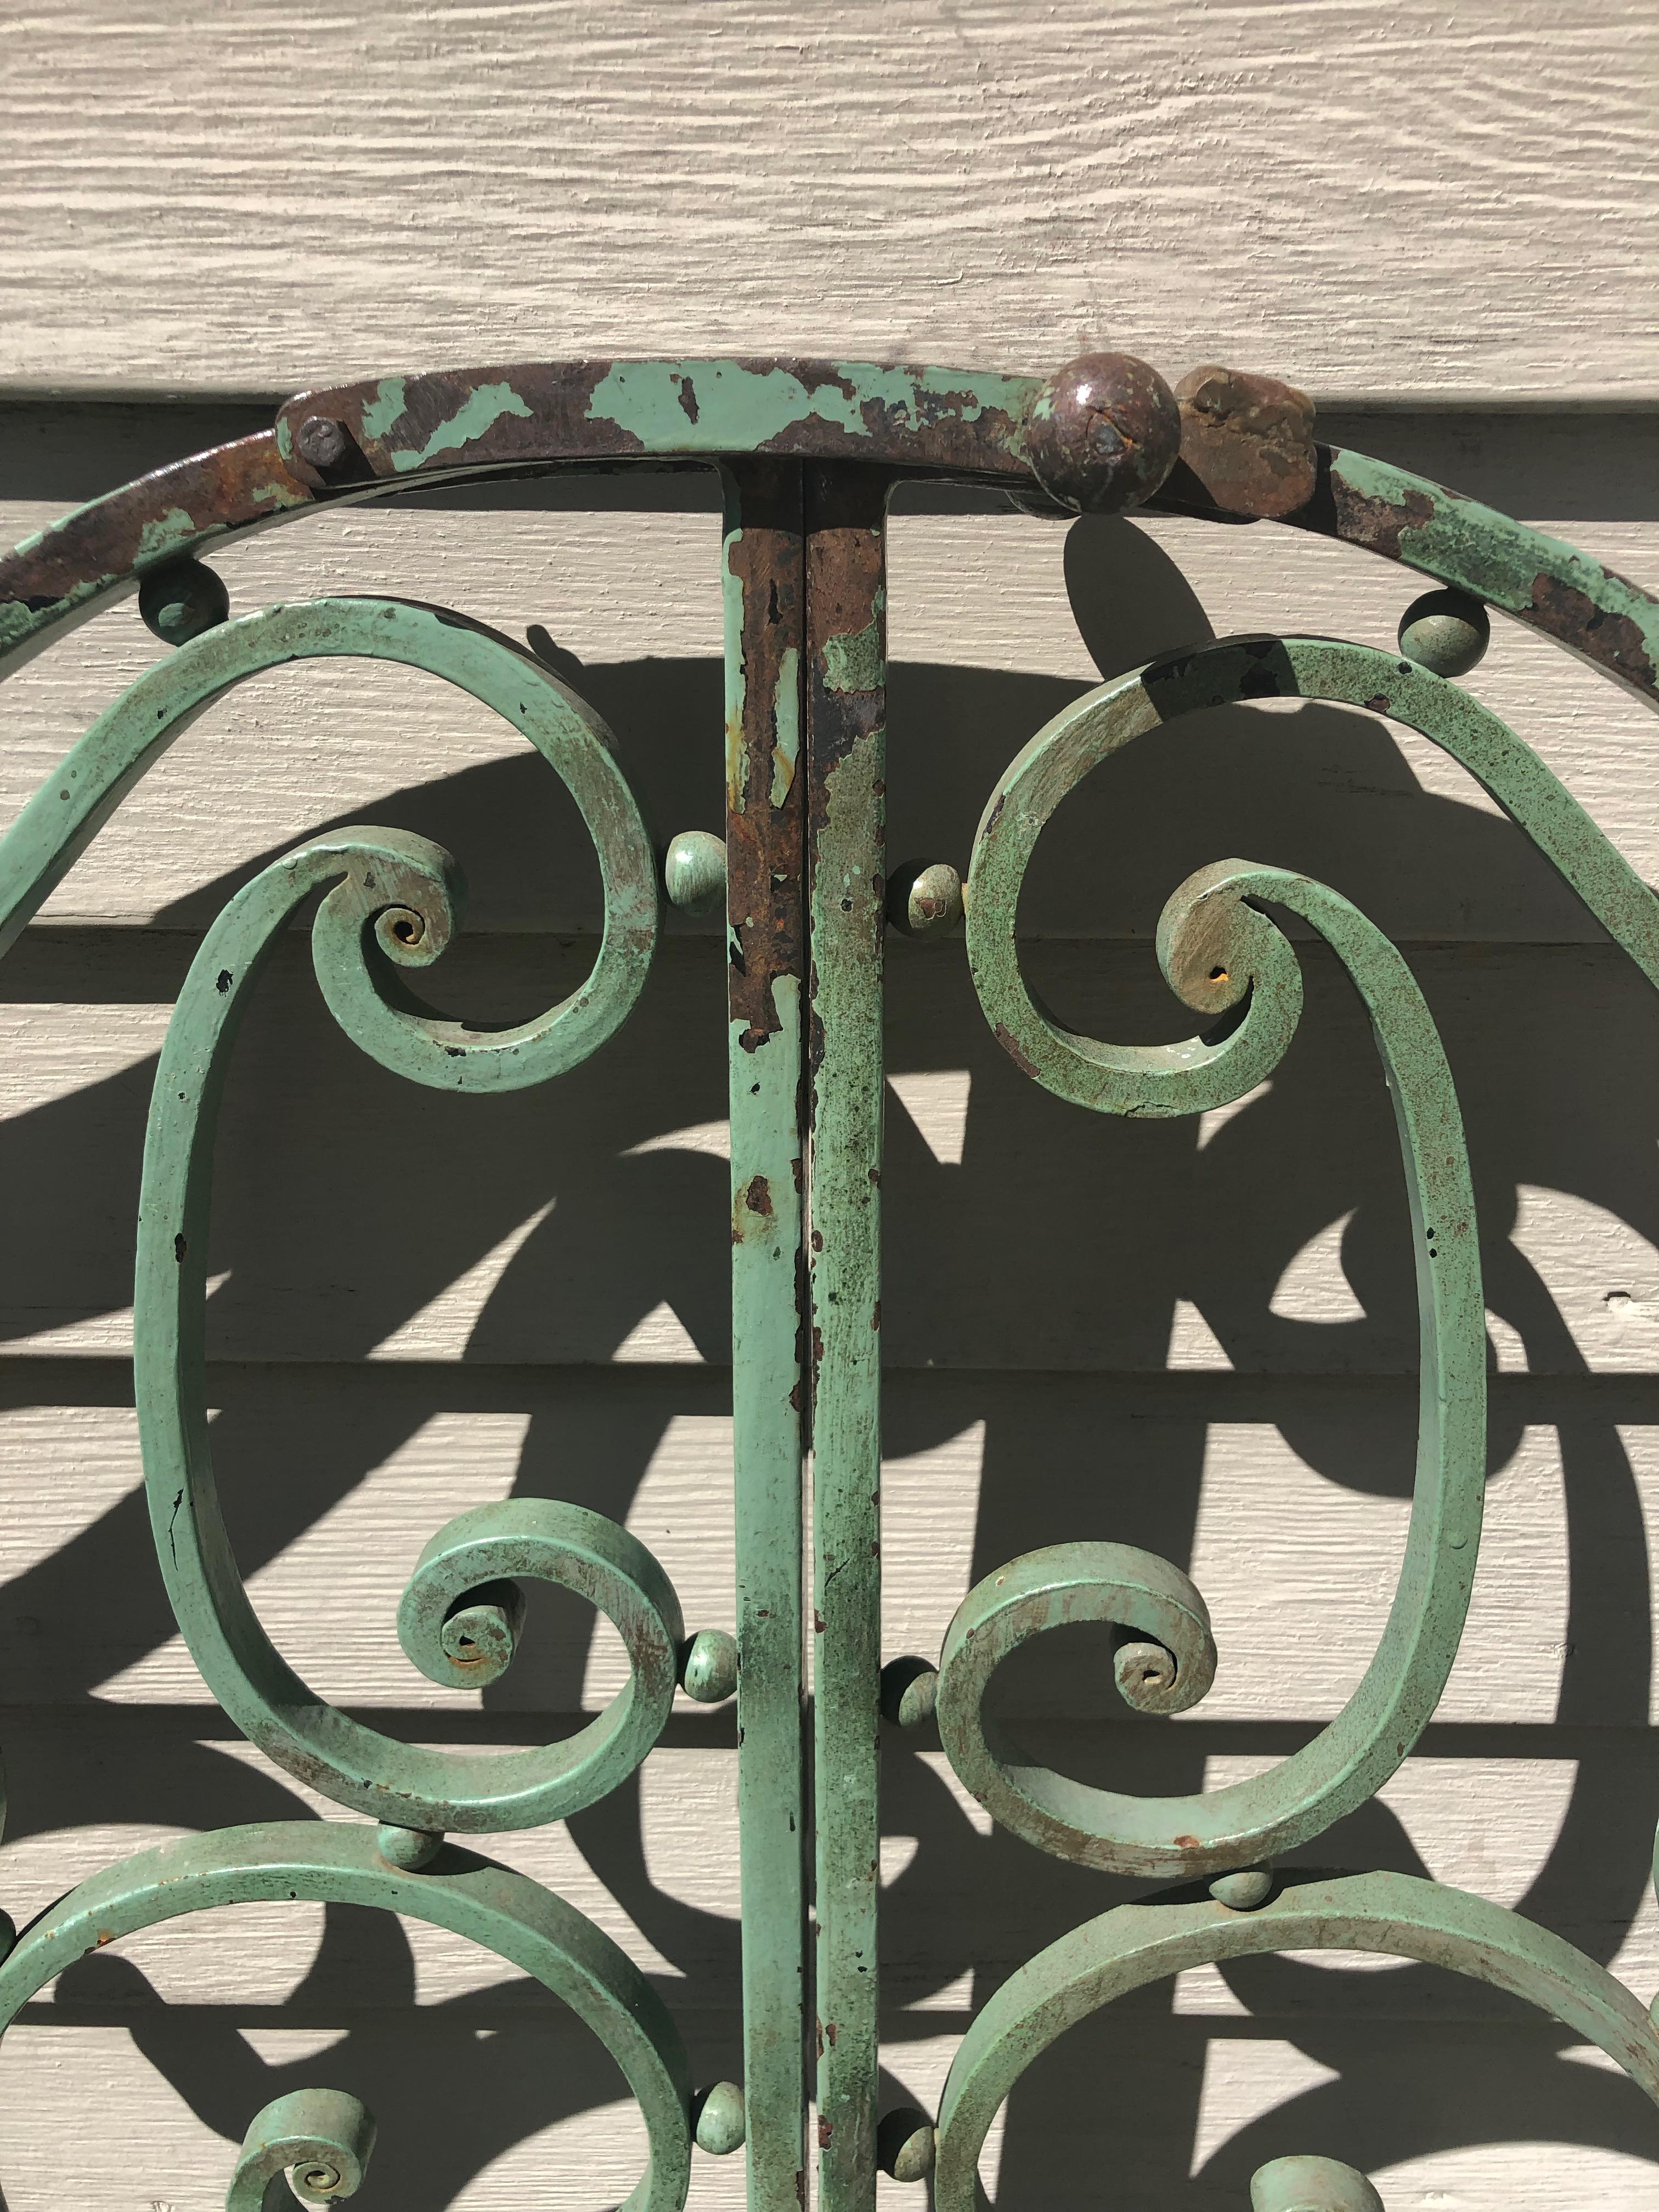 Pair of French Wrought Iron Beaux Arts-Style Gates with Mounting Hardware #1 3